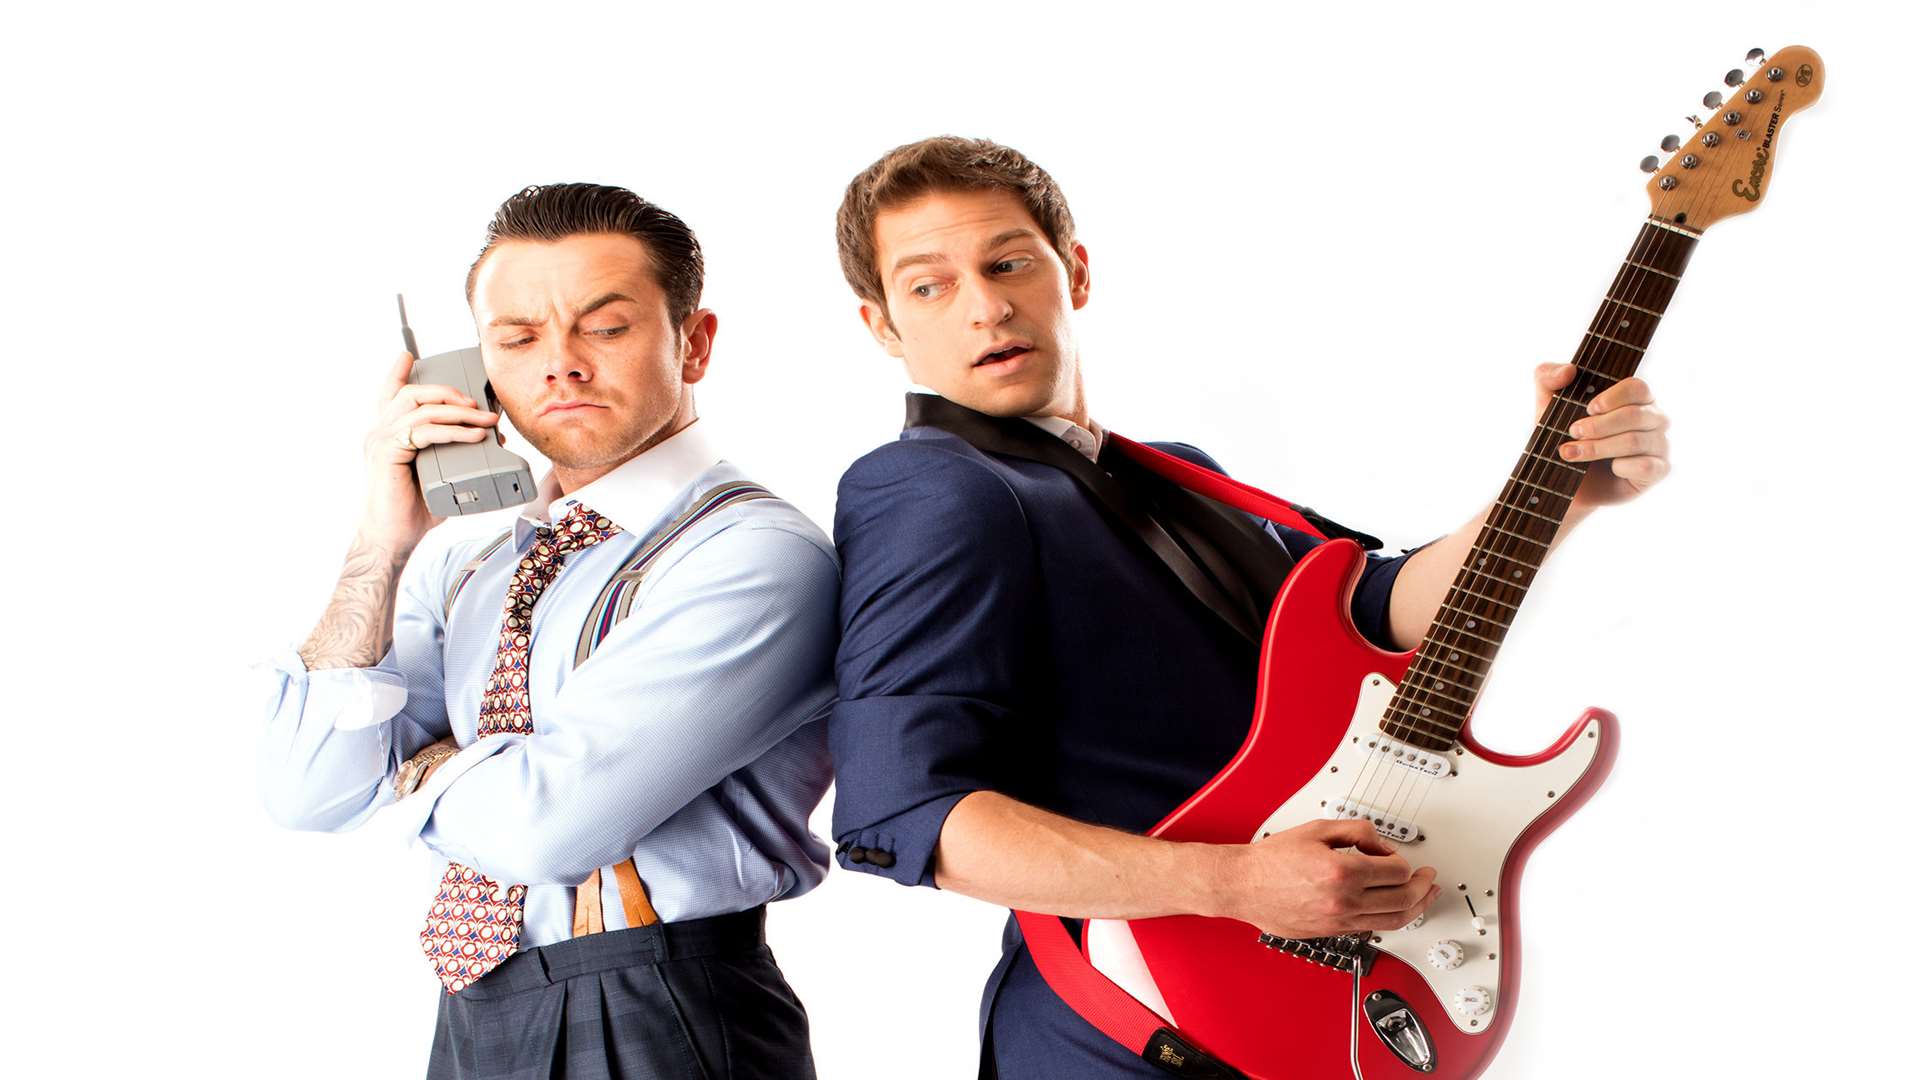 X Factor runner-up Ray Quinn and Jon Robyns star in The Wedding Singer